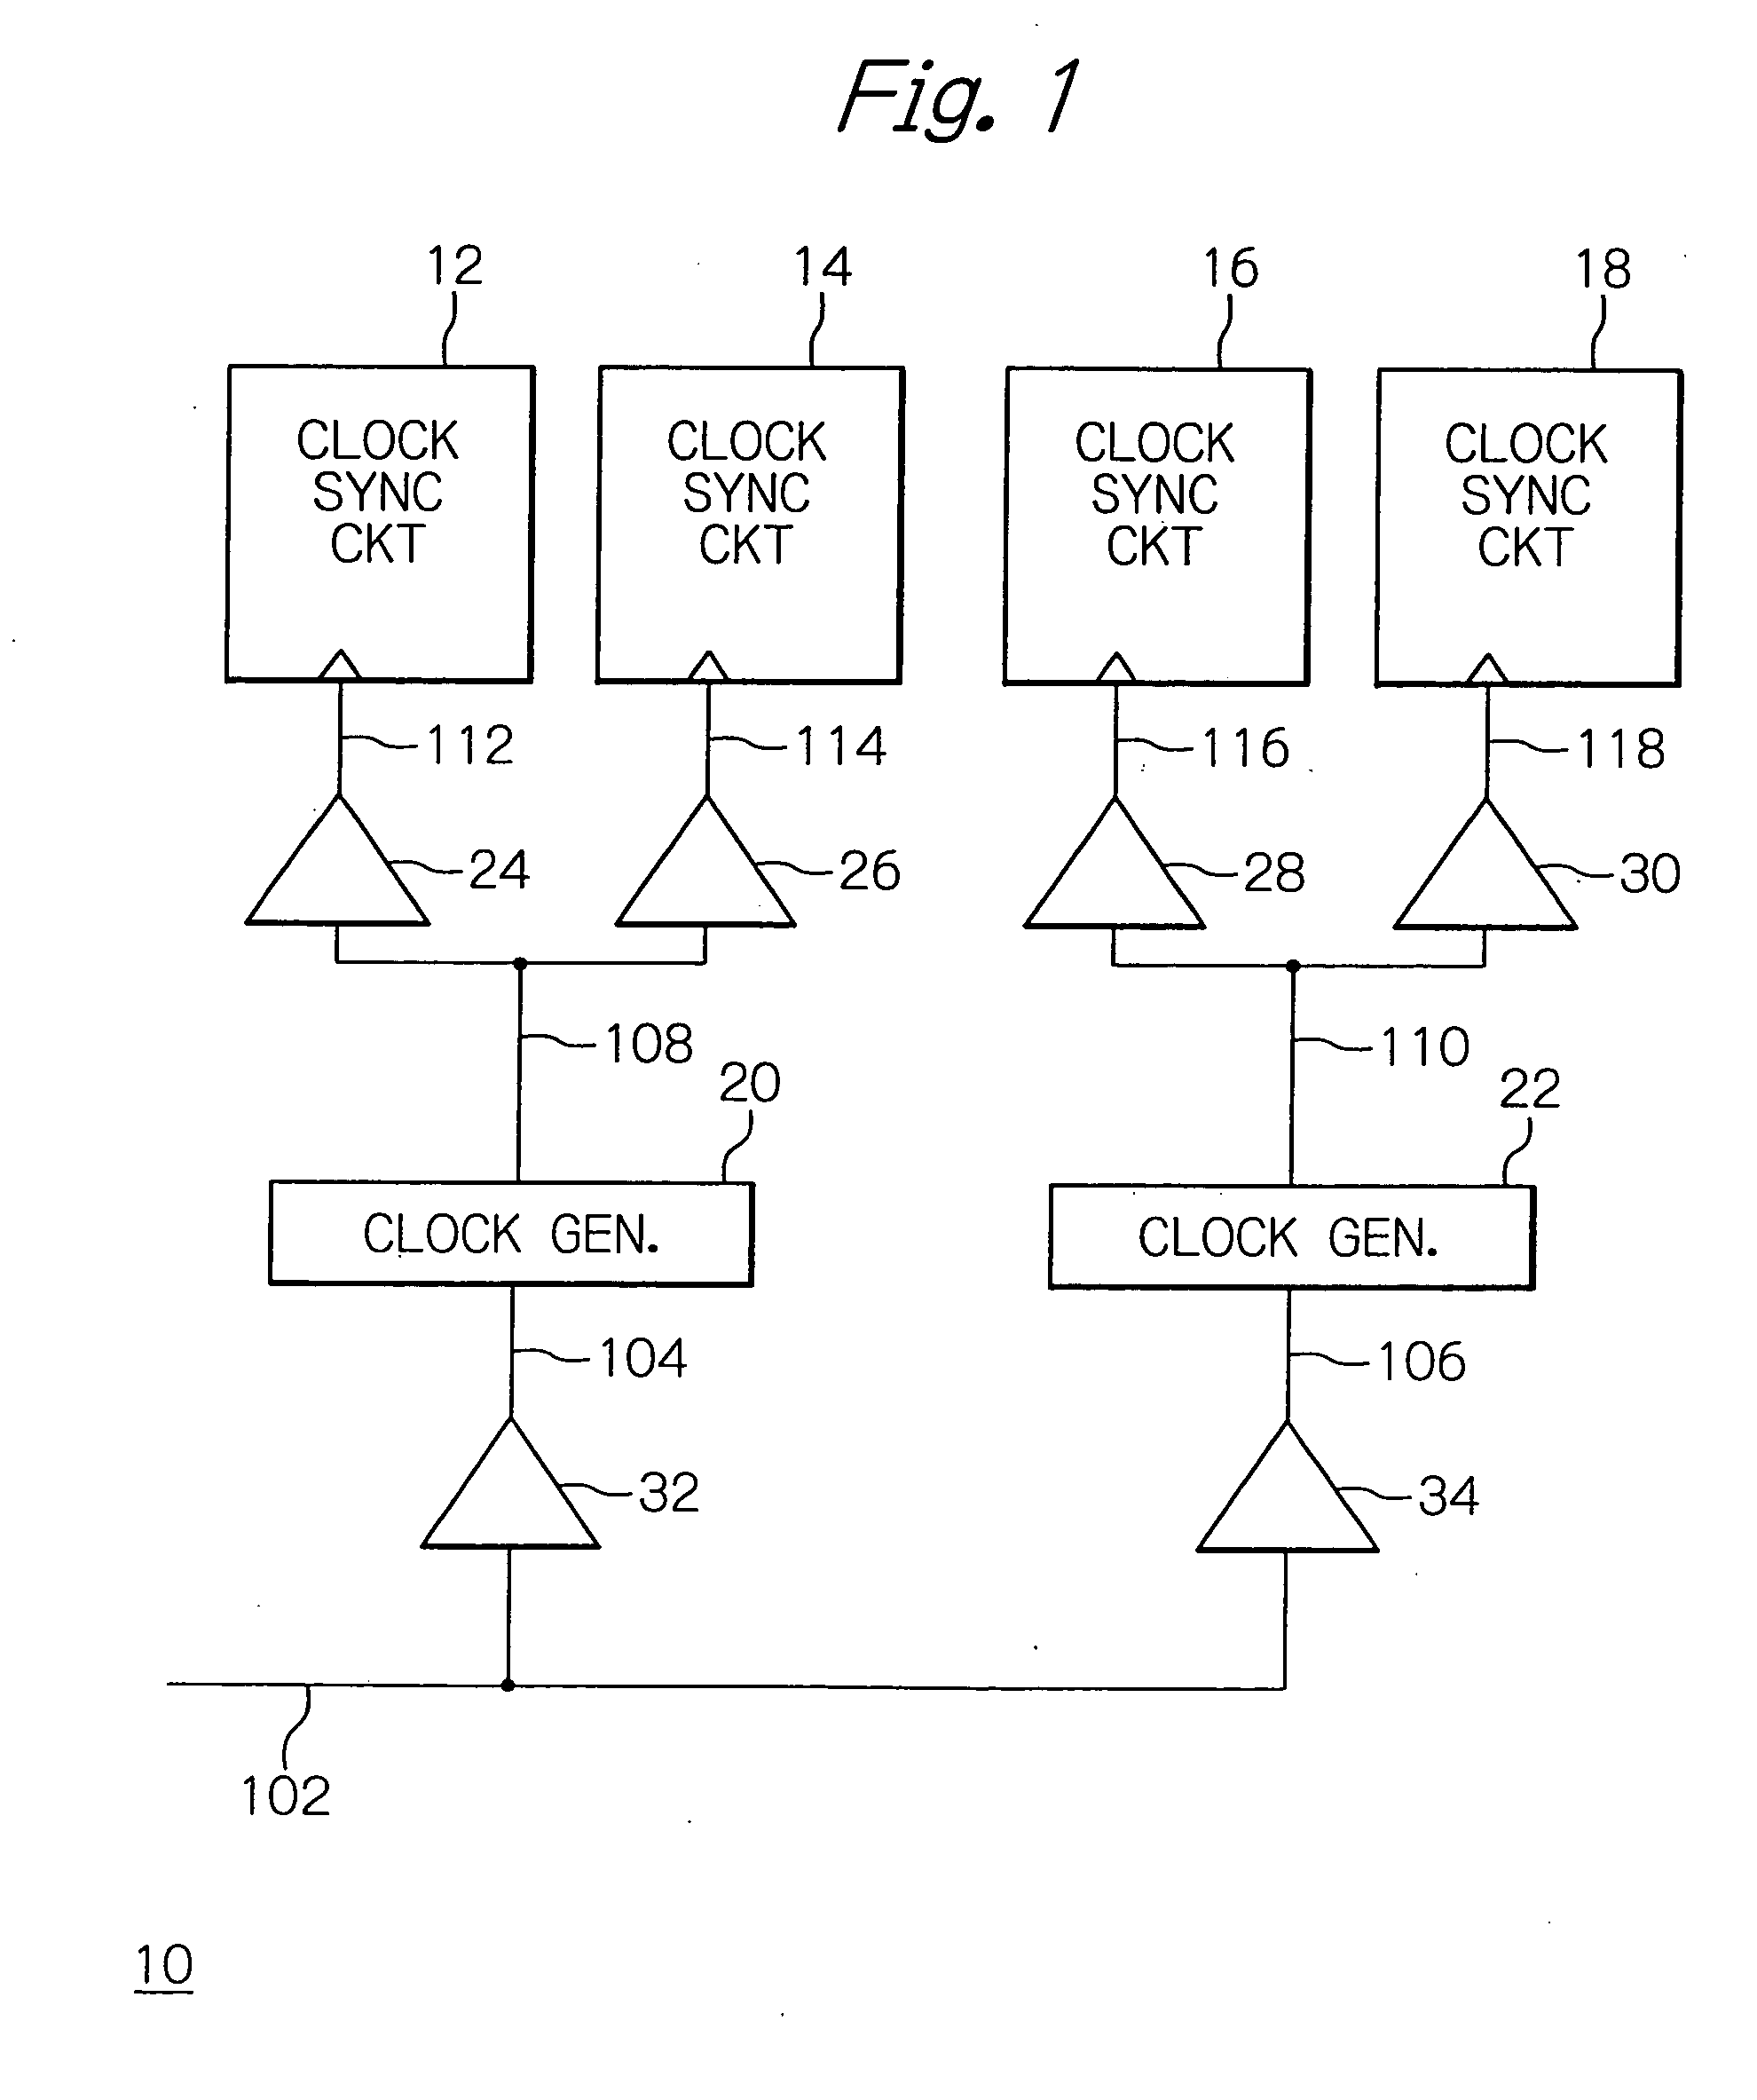 Clock distributor for use in semiconductor logics for generating clock signals when enabled and a method therefor